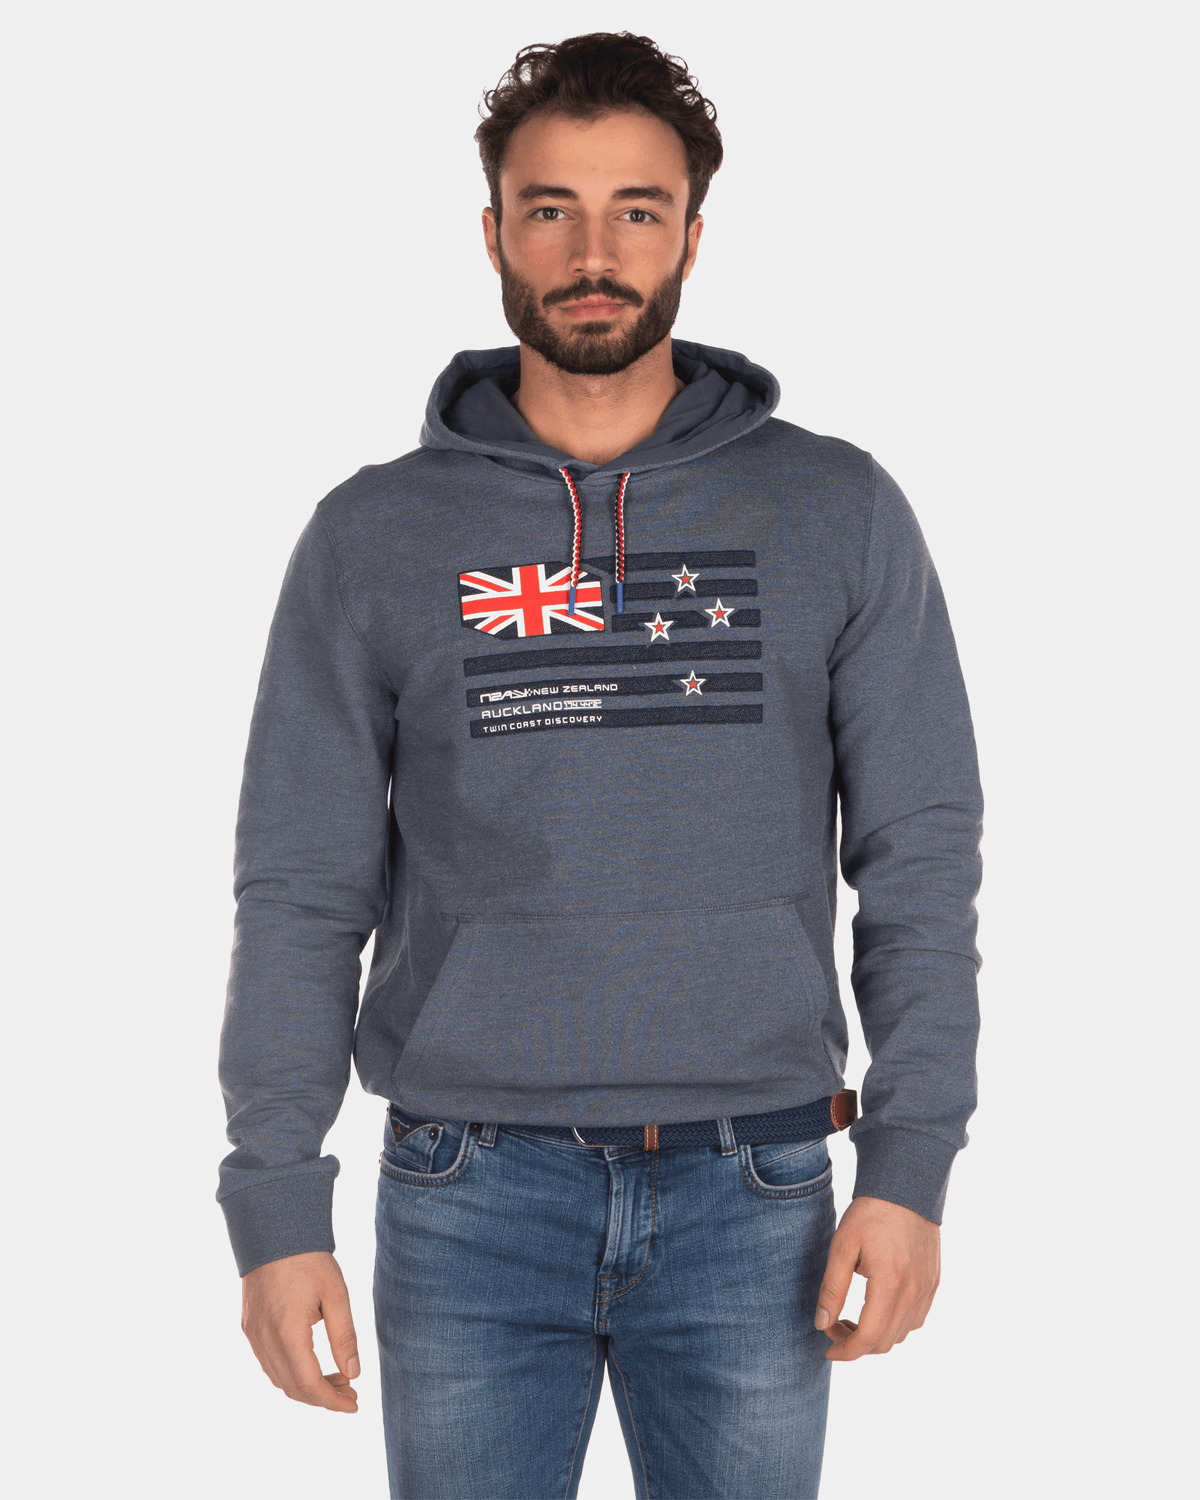 Hoodie with flag - Green Grey